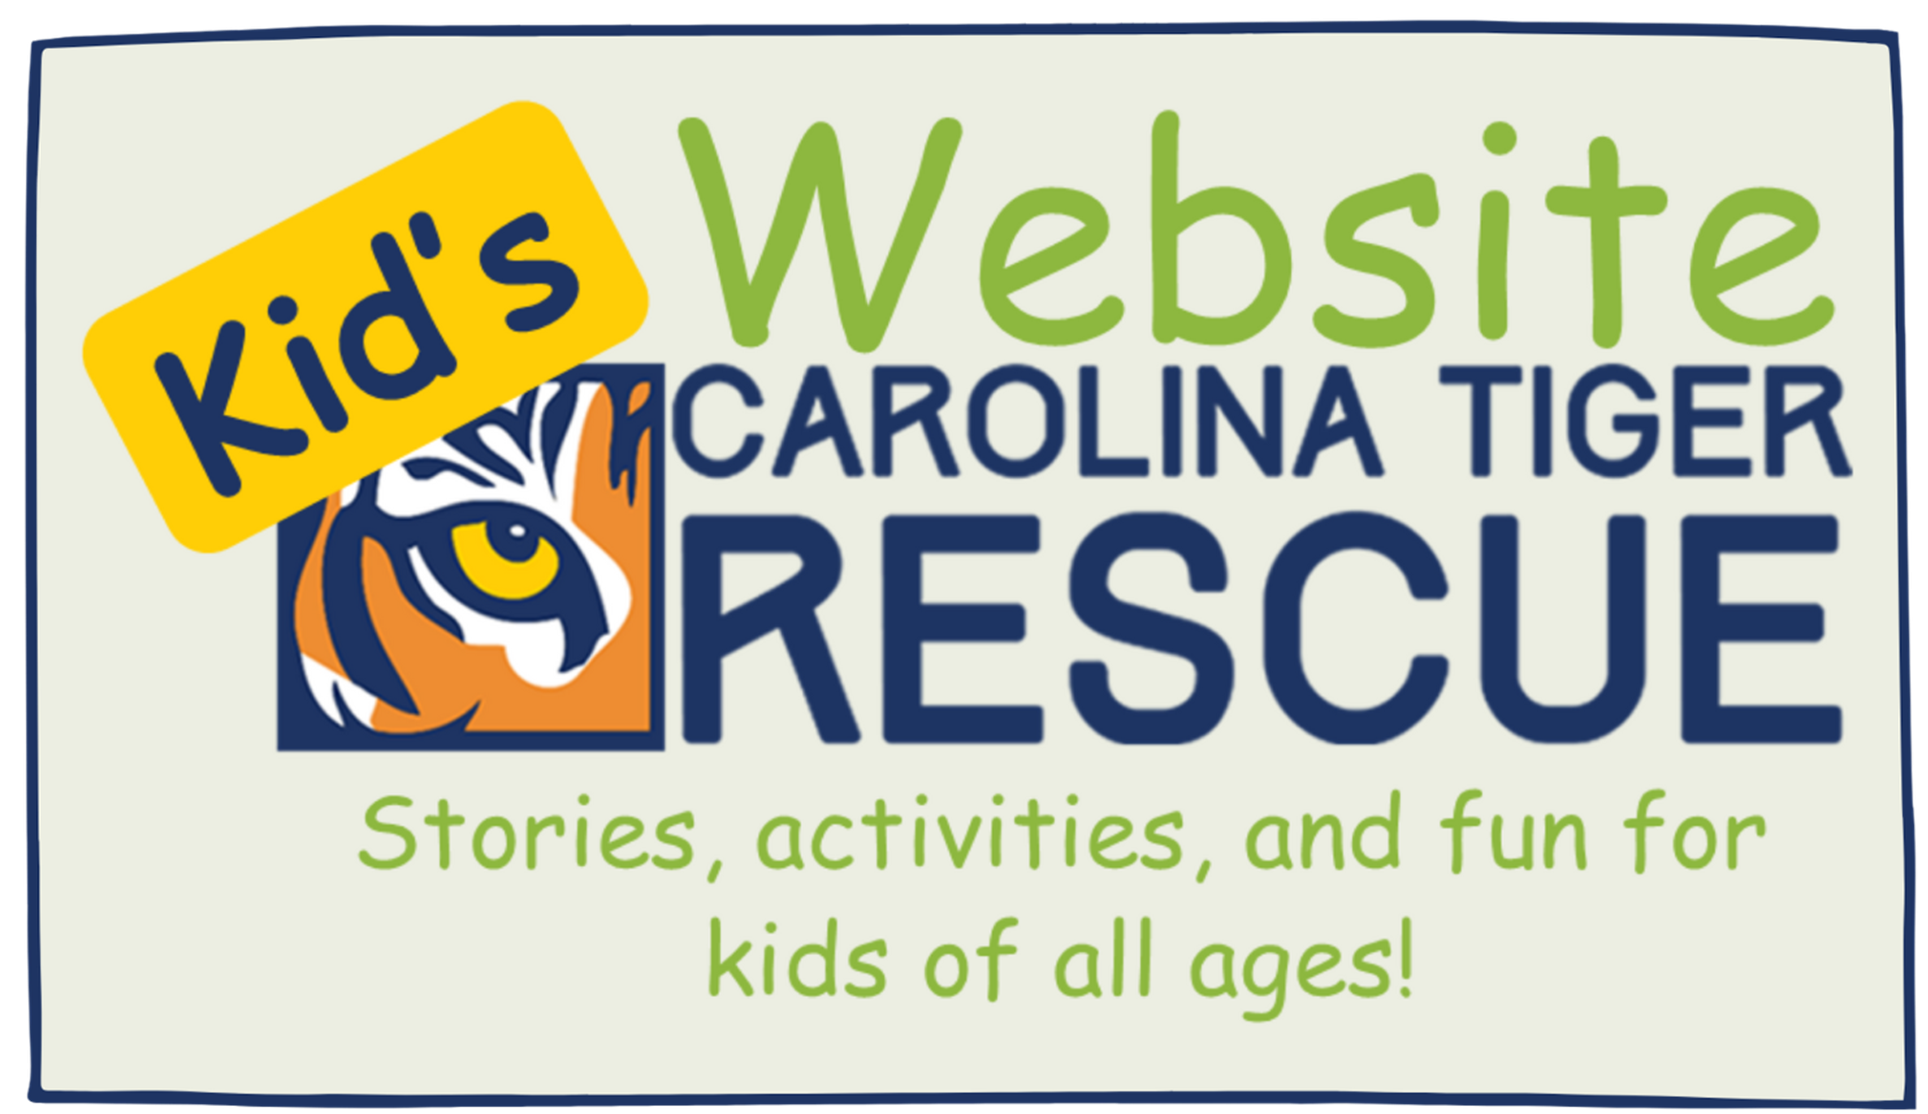 Stories, activities and fun for kids of all ages on our kid friendly website